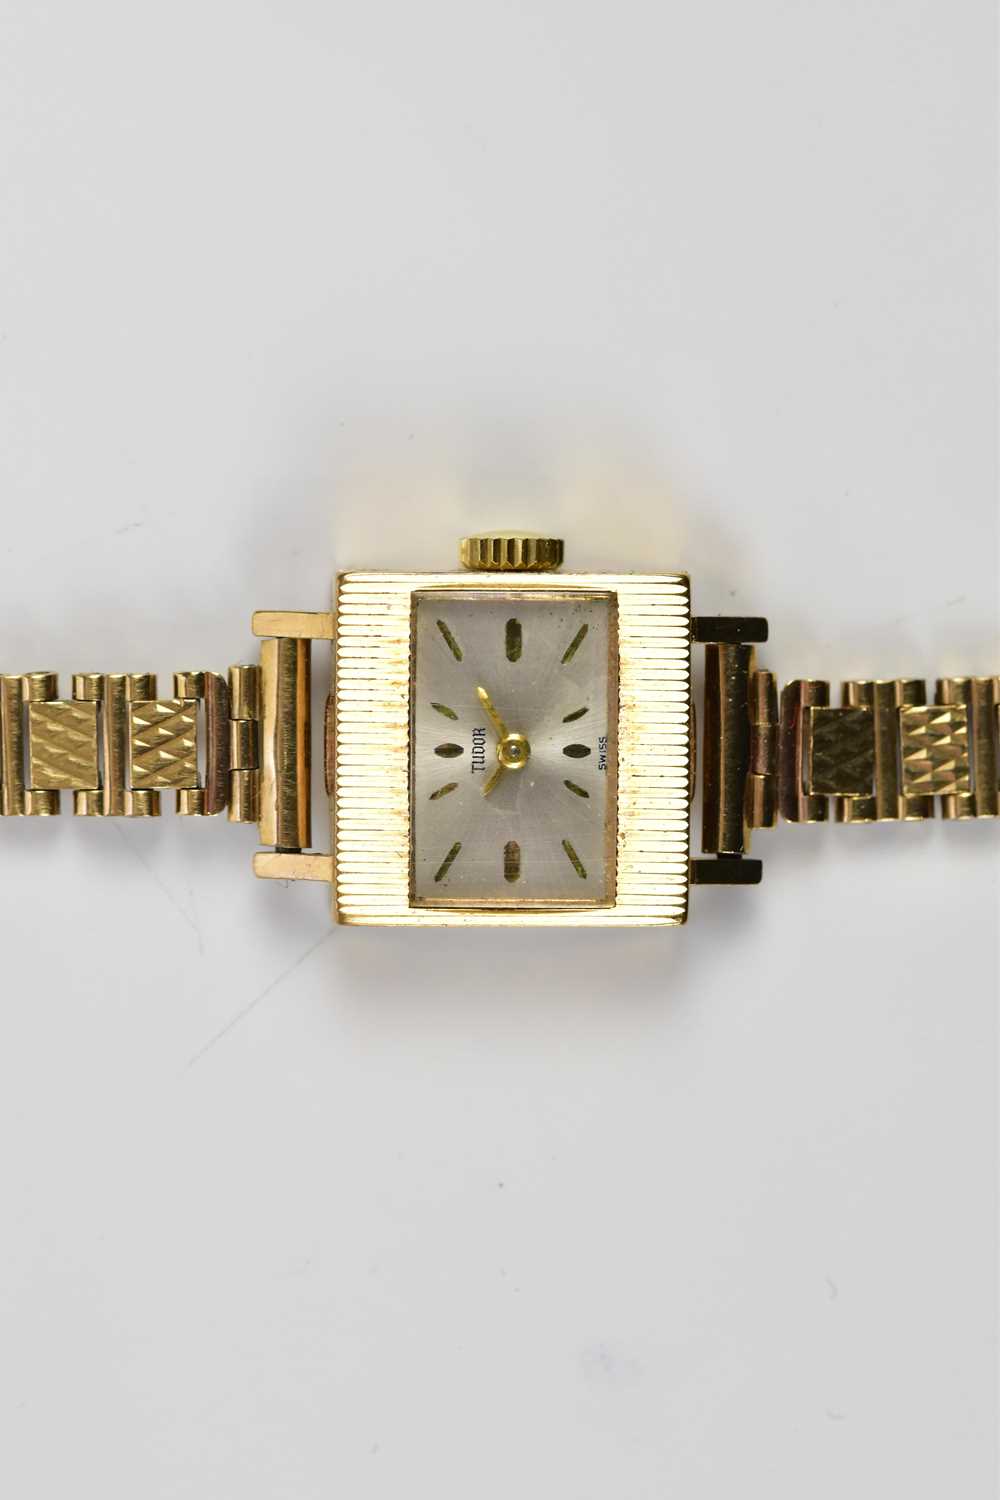 TUDOR; a lady's 9ct gold cased wristwatch, the dial set with batons, suspended on a 9ct gold